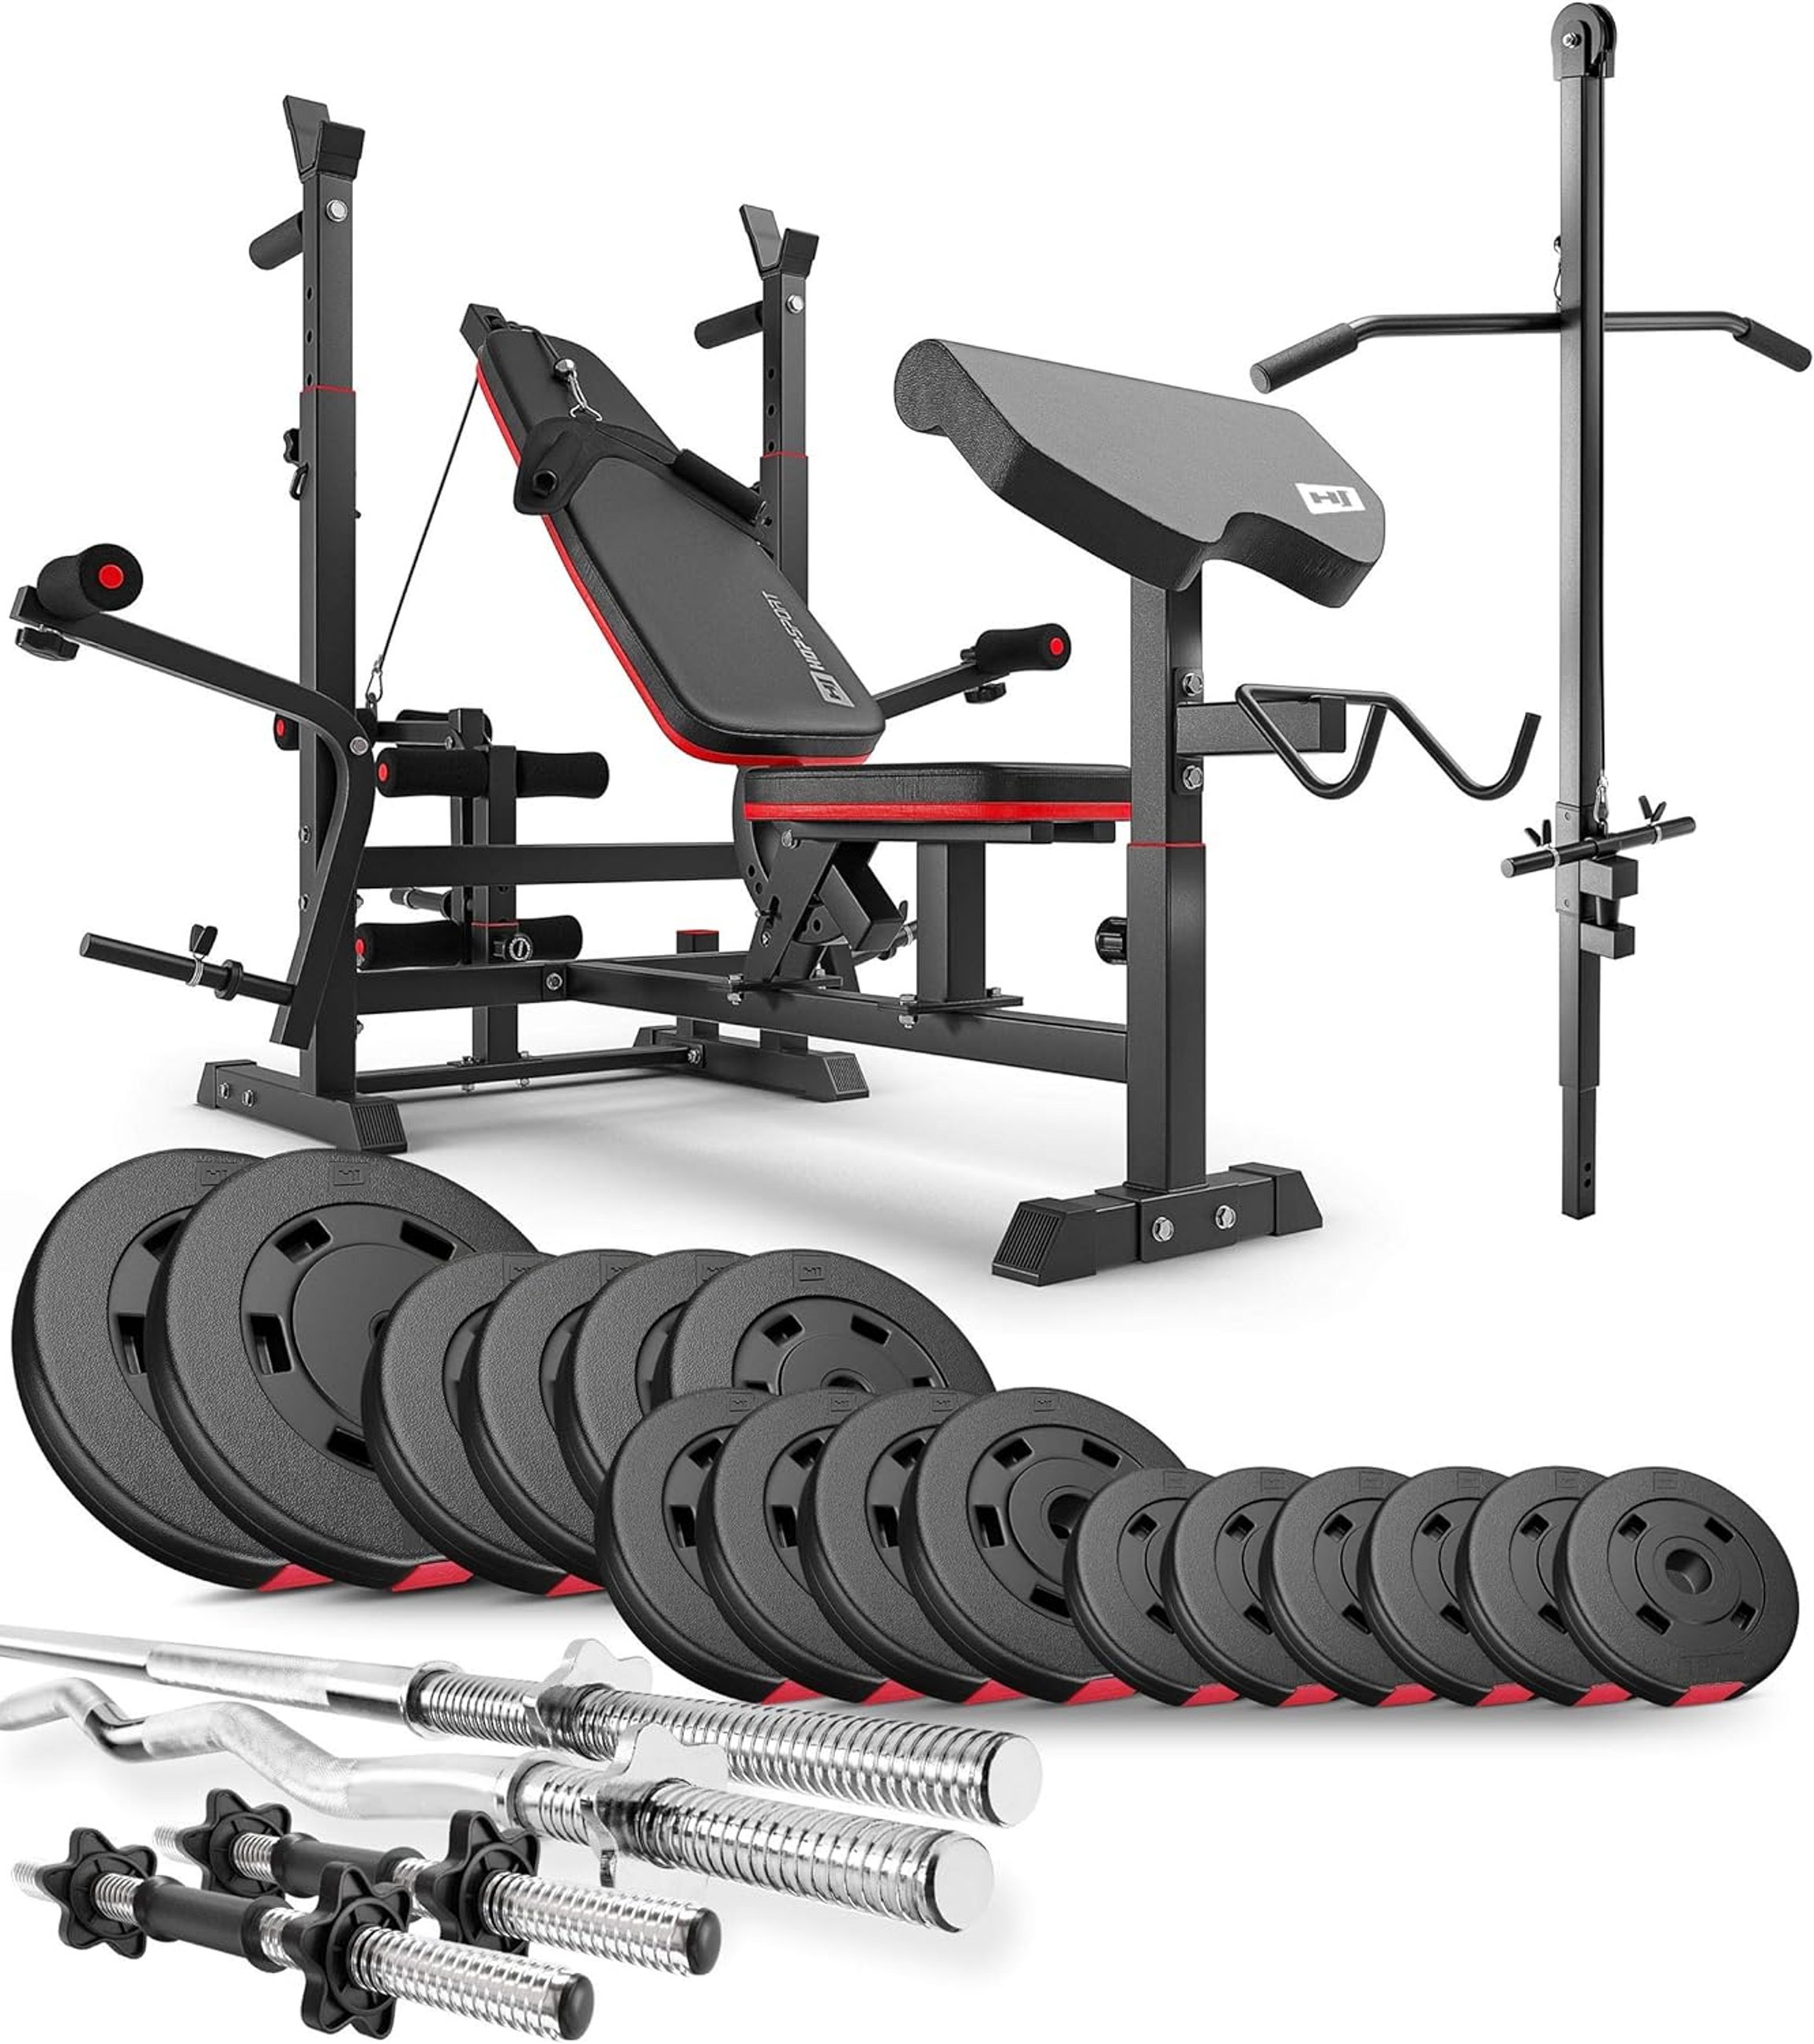 Premium 75 kg Barbell Set with HS-1075 Weight Bench